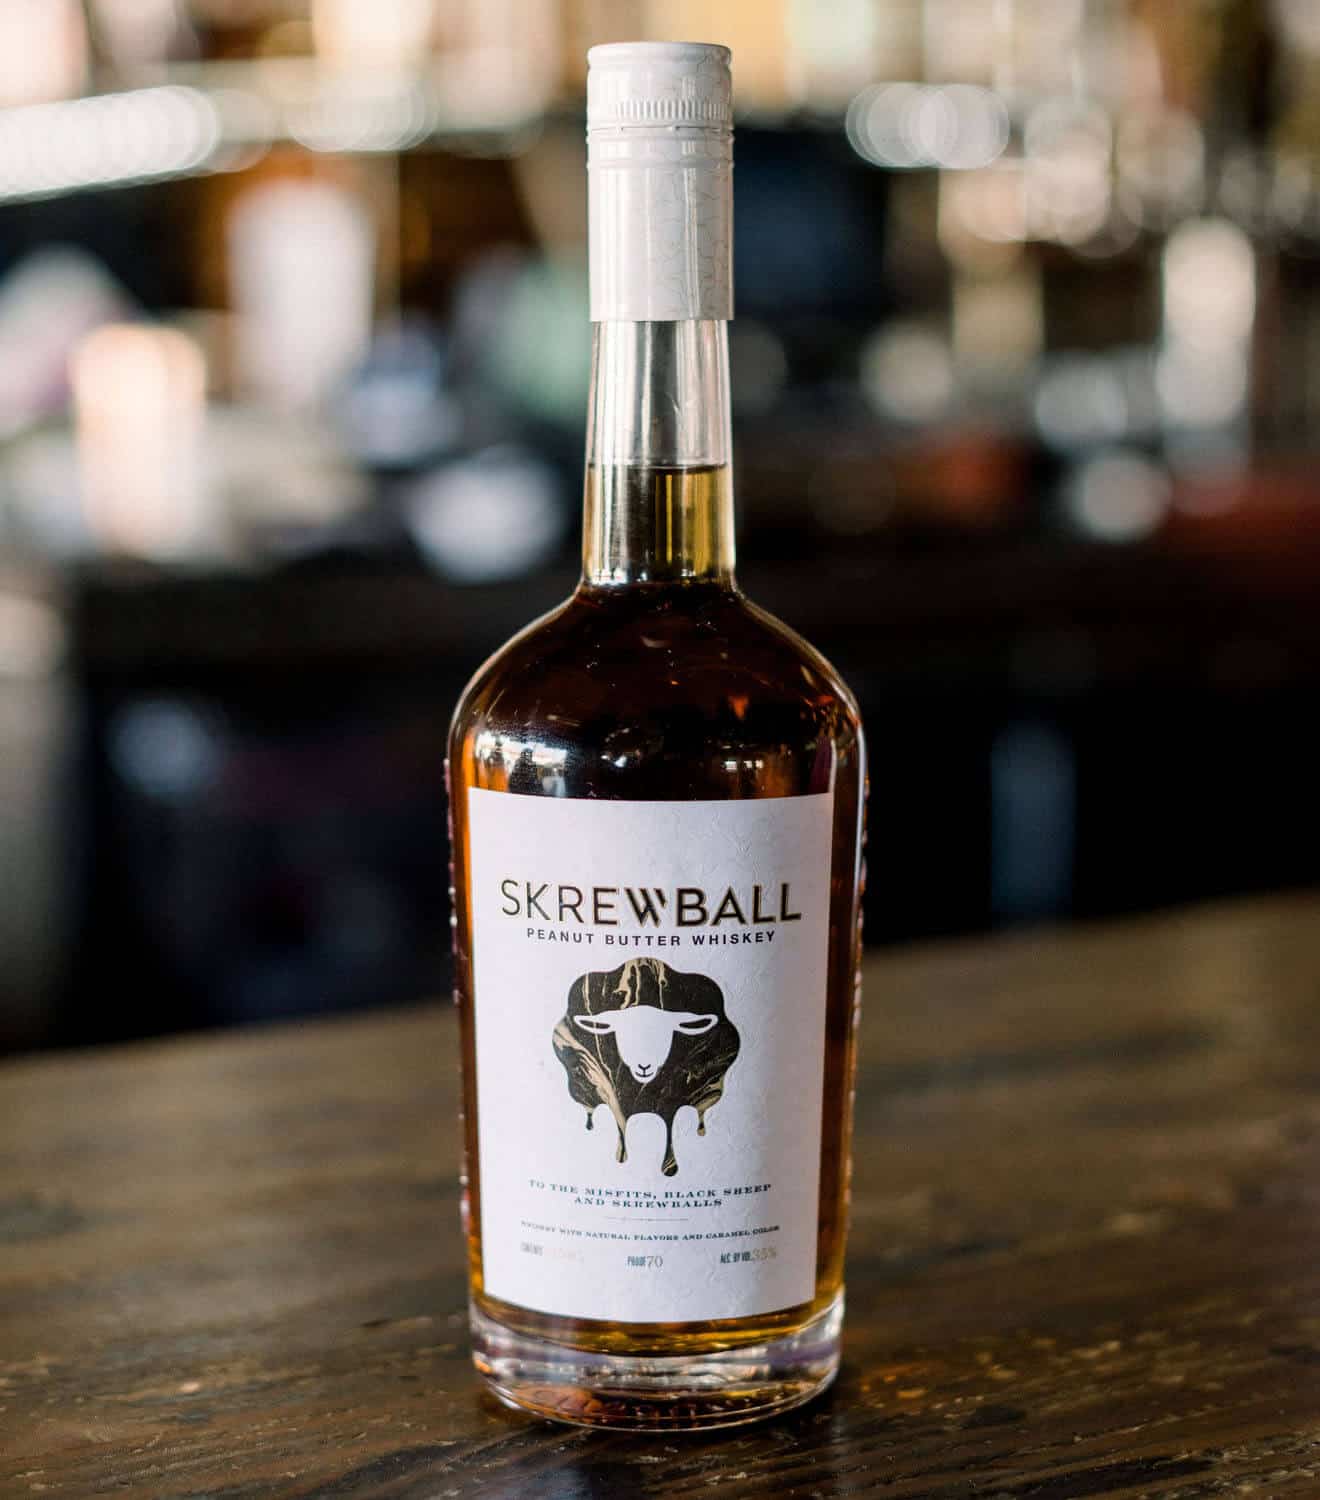 Skrewball: A Unique Whiskey Made With Peanut Butter